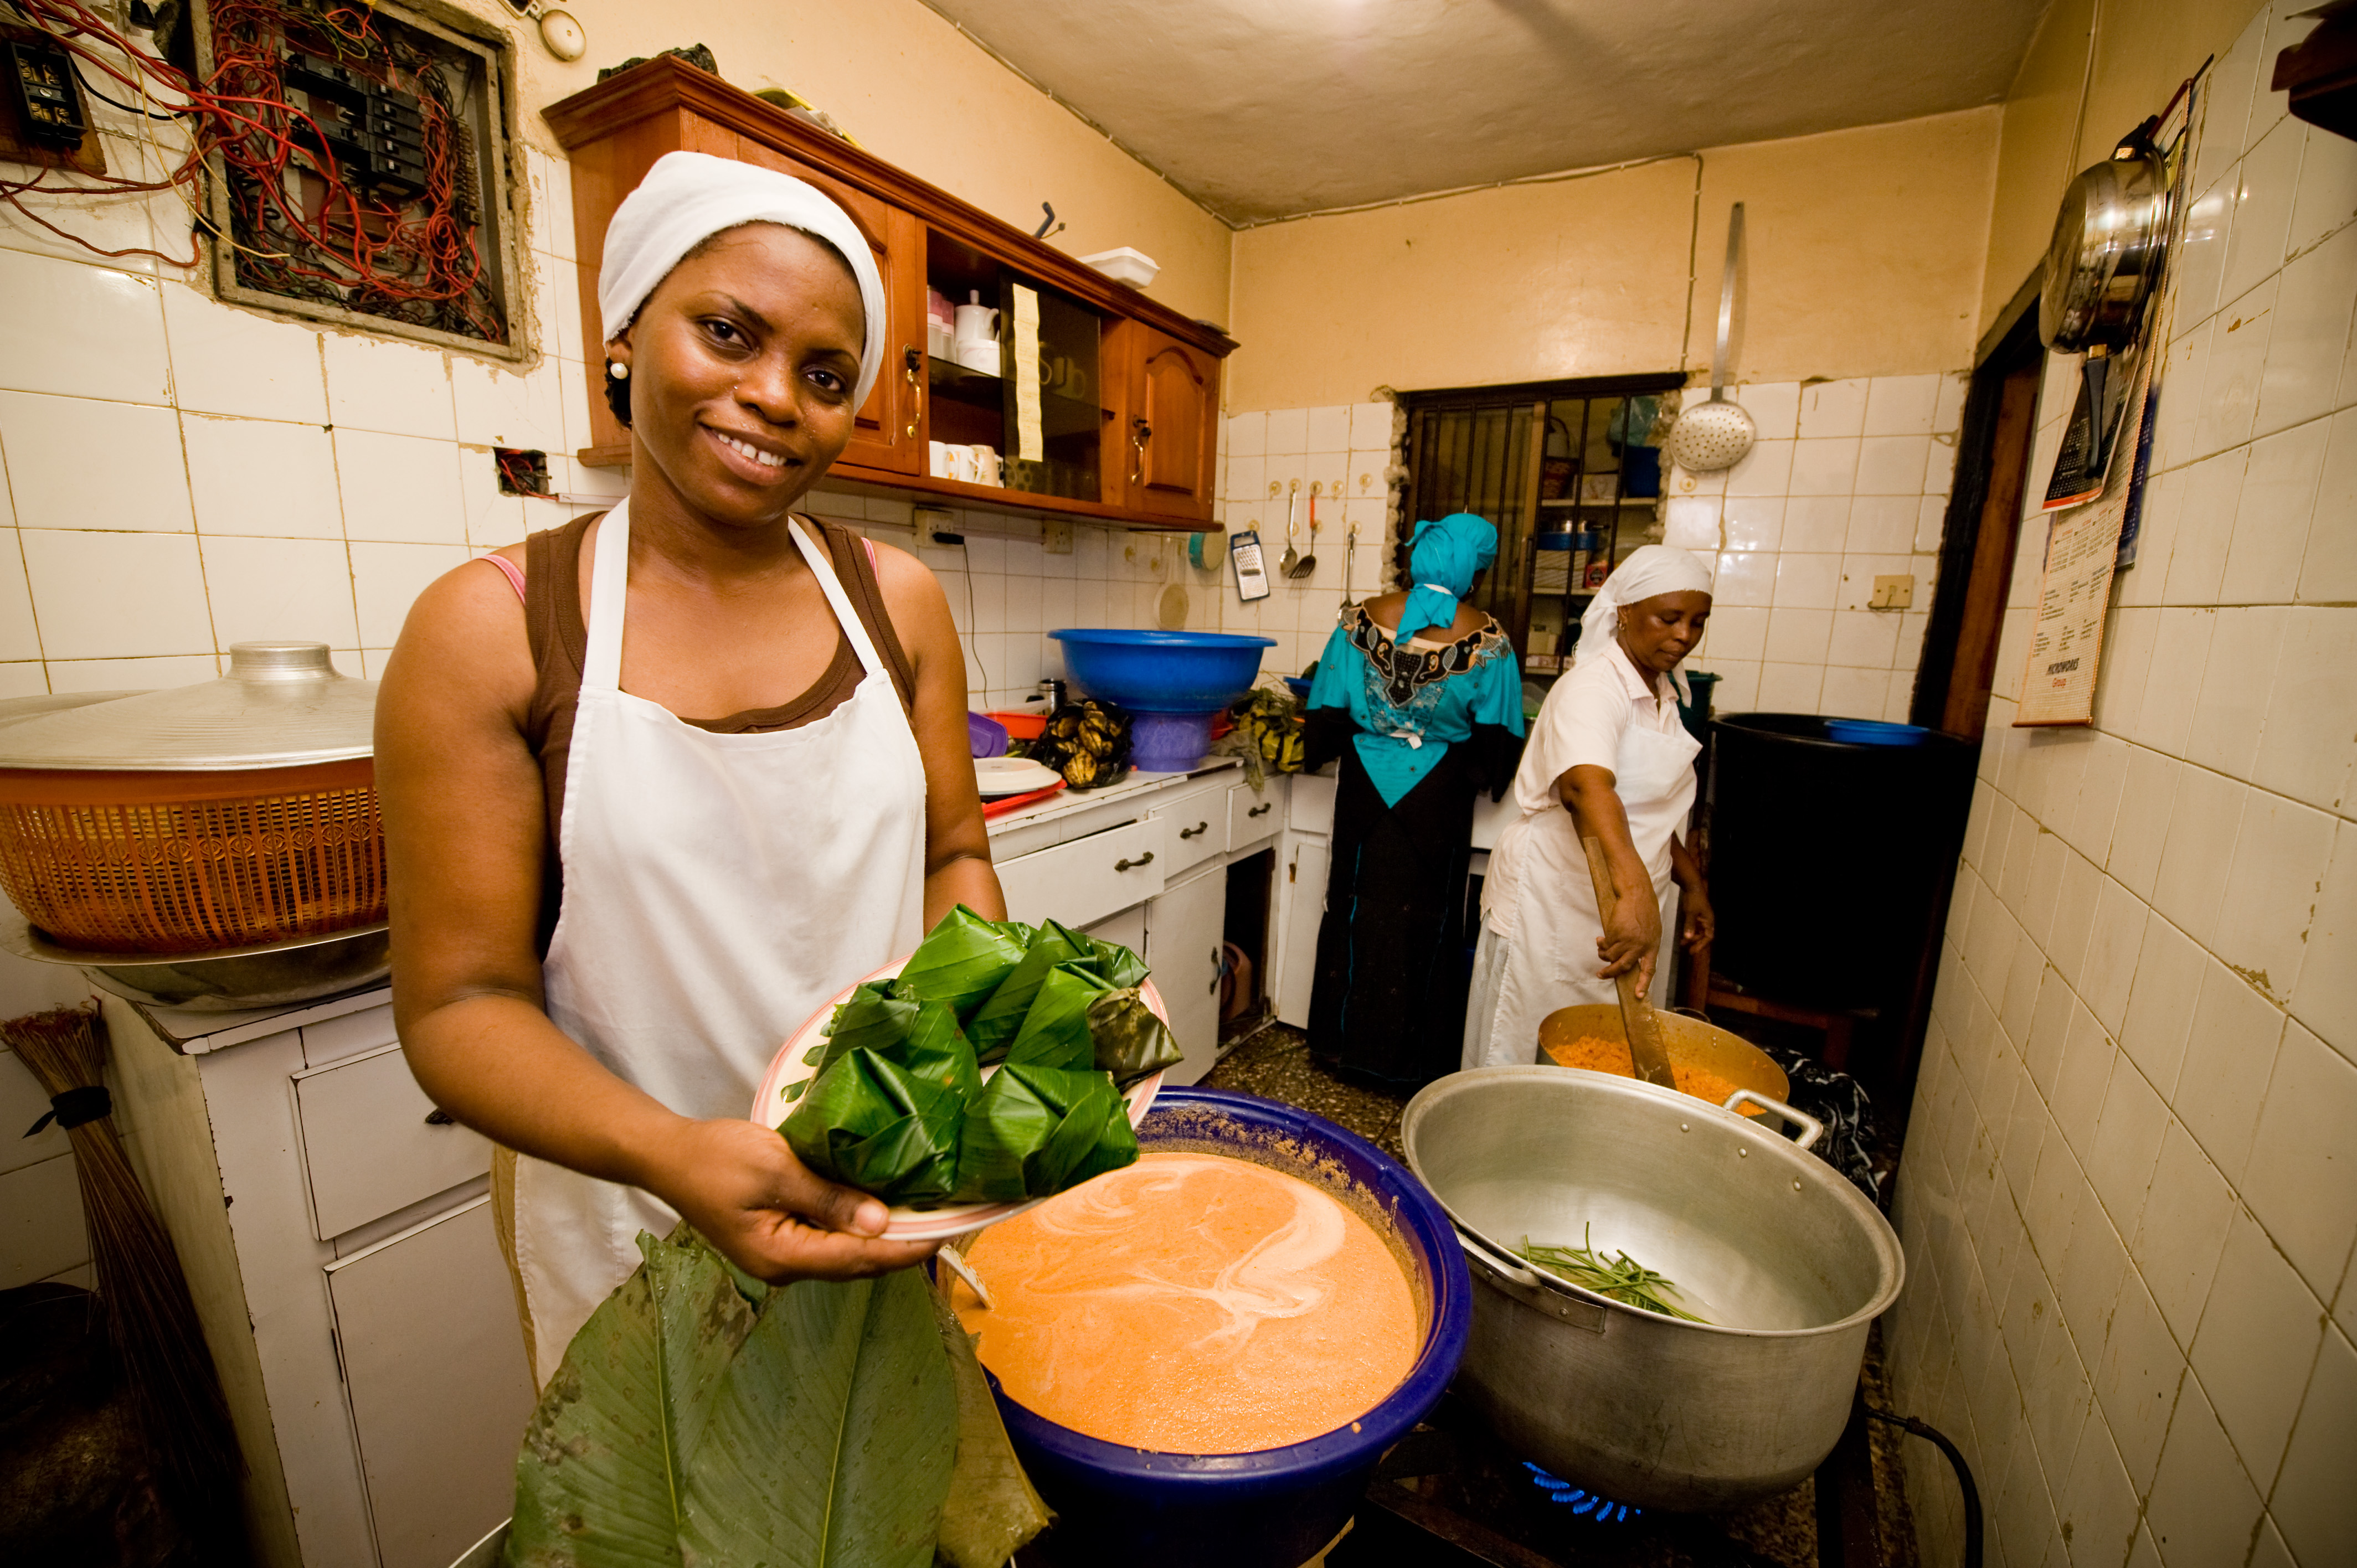 Ayo Megbope is a graduate of Goldman Sachs' 10,000 Women program, and the owner of “No Leftovers Nigeria”, a catering company and restaurant in Lagos, Nigeria. Photo provided by “Goldman Sachs | 10,000 Women”